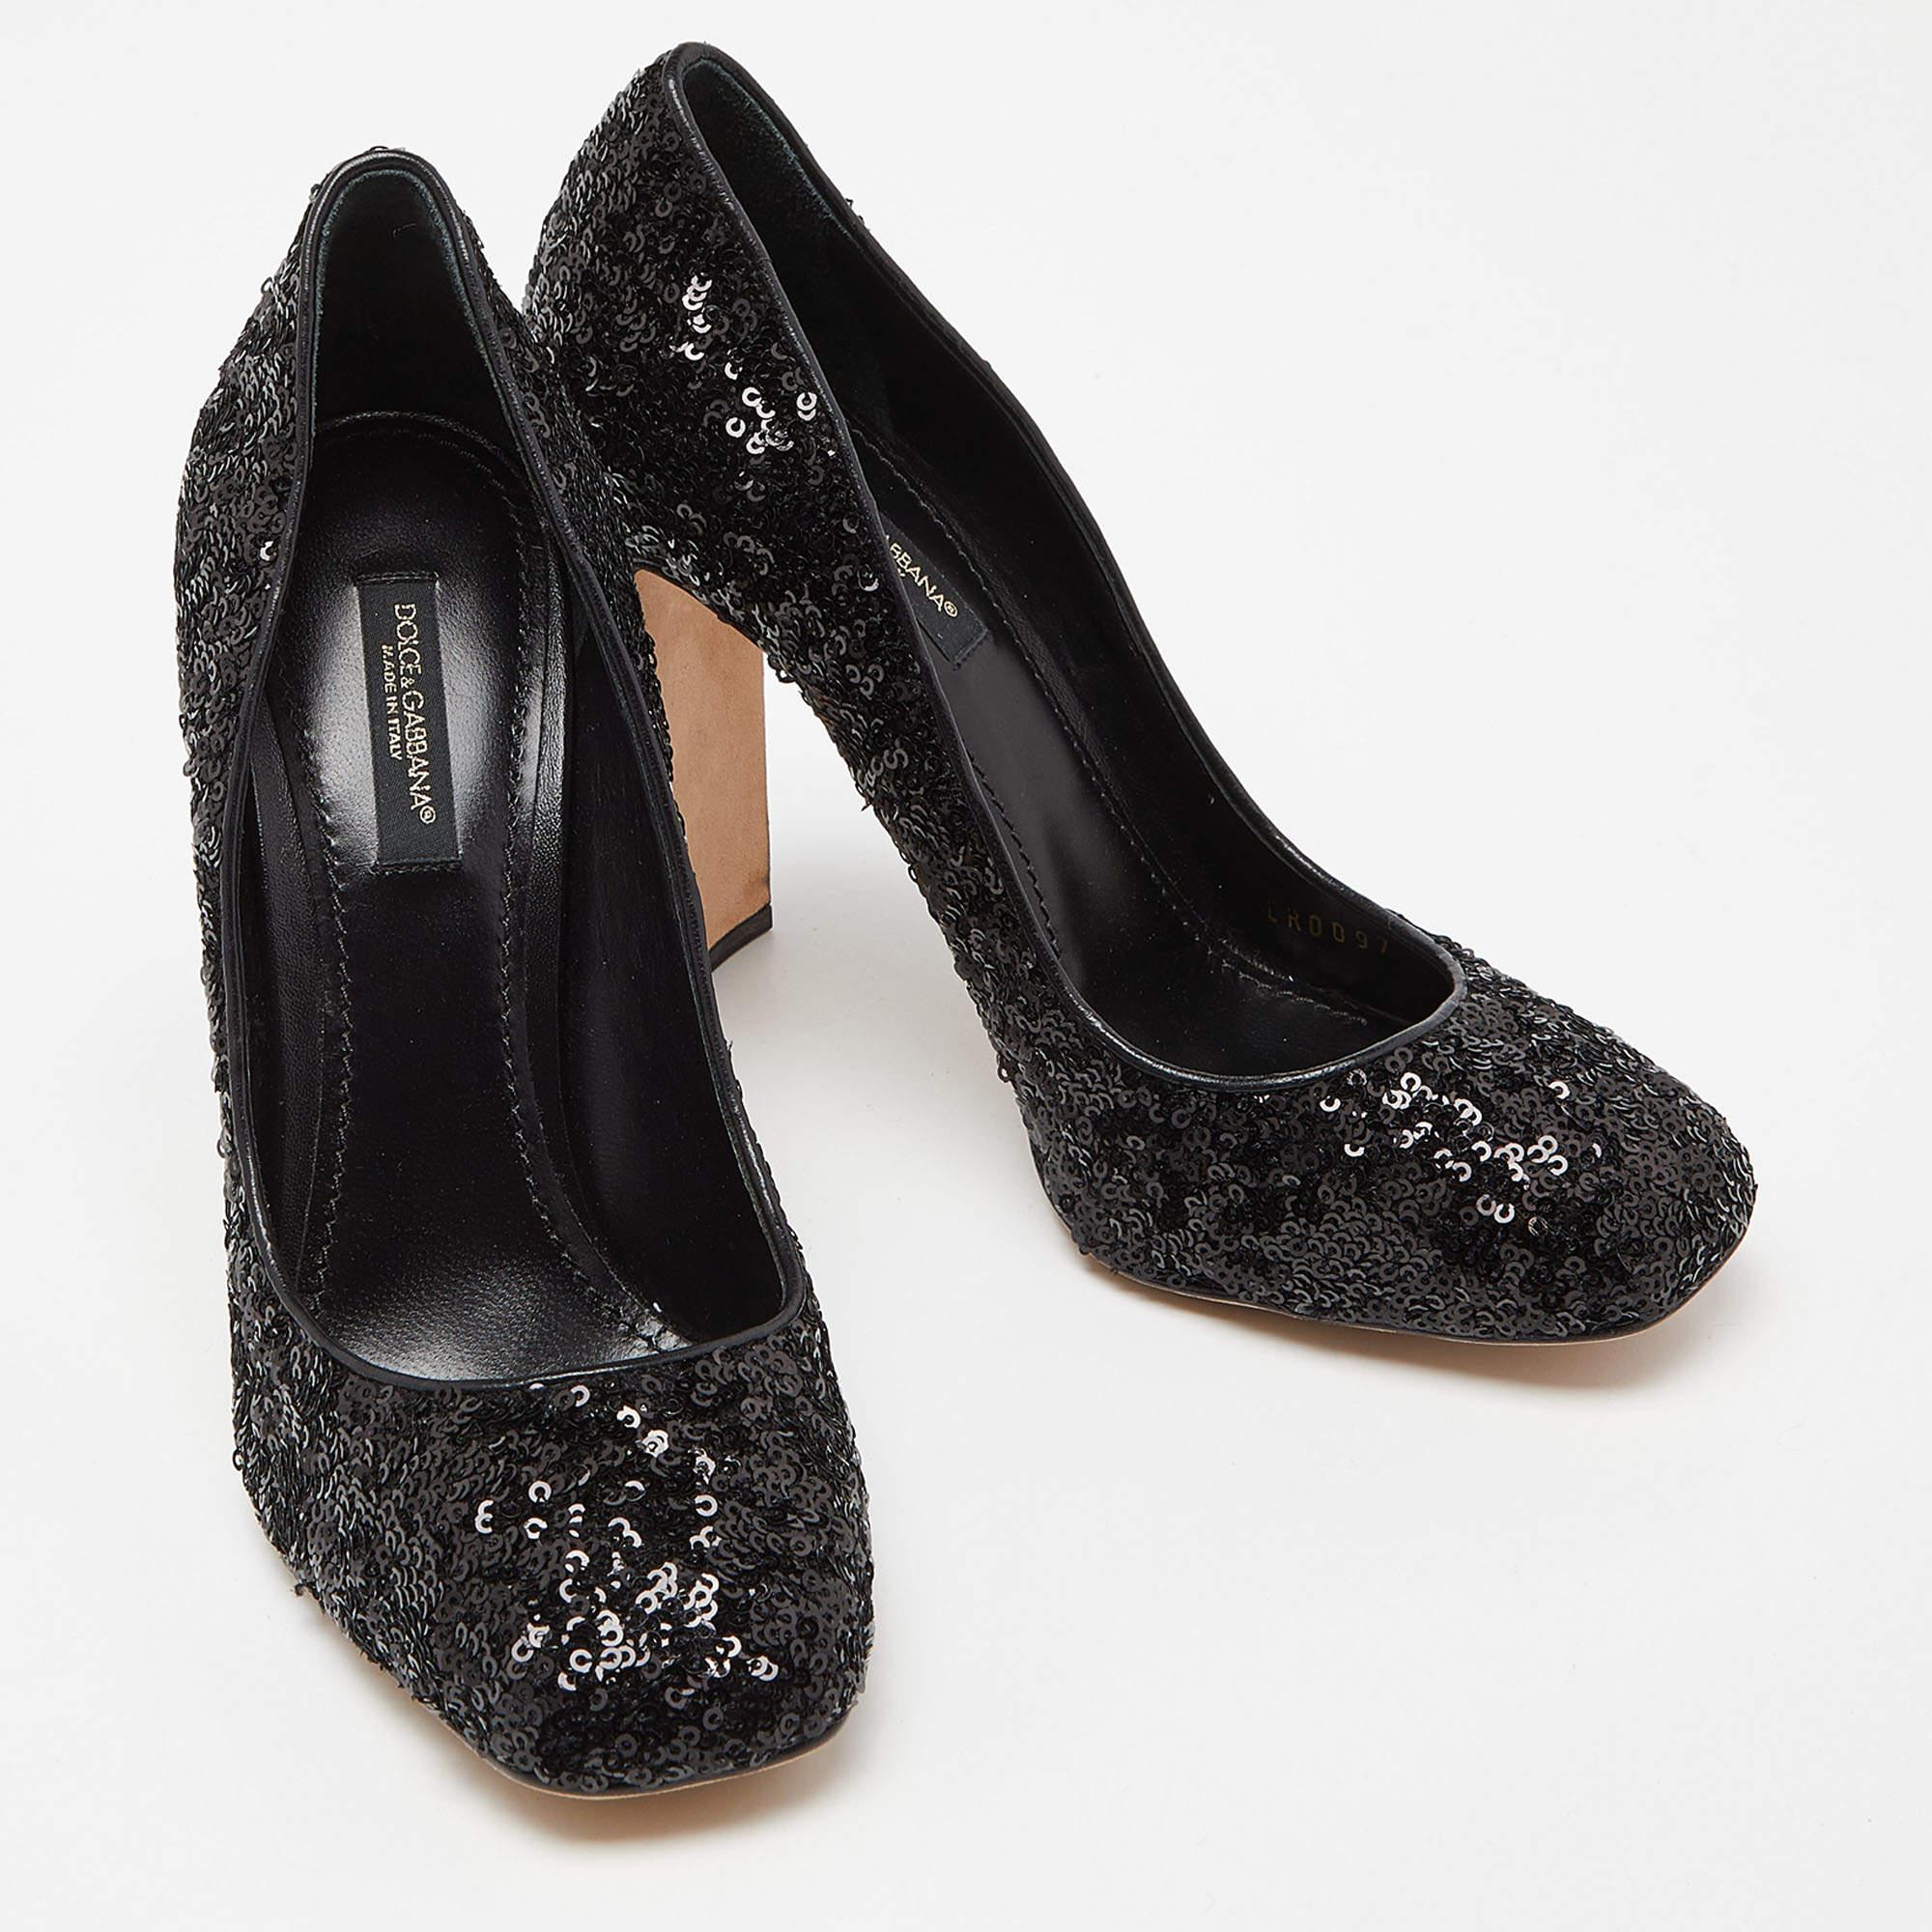 Dolce & Gabbana Black Sequins and Leather Block Heel Pumps Size 37.5 For Sale 1